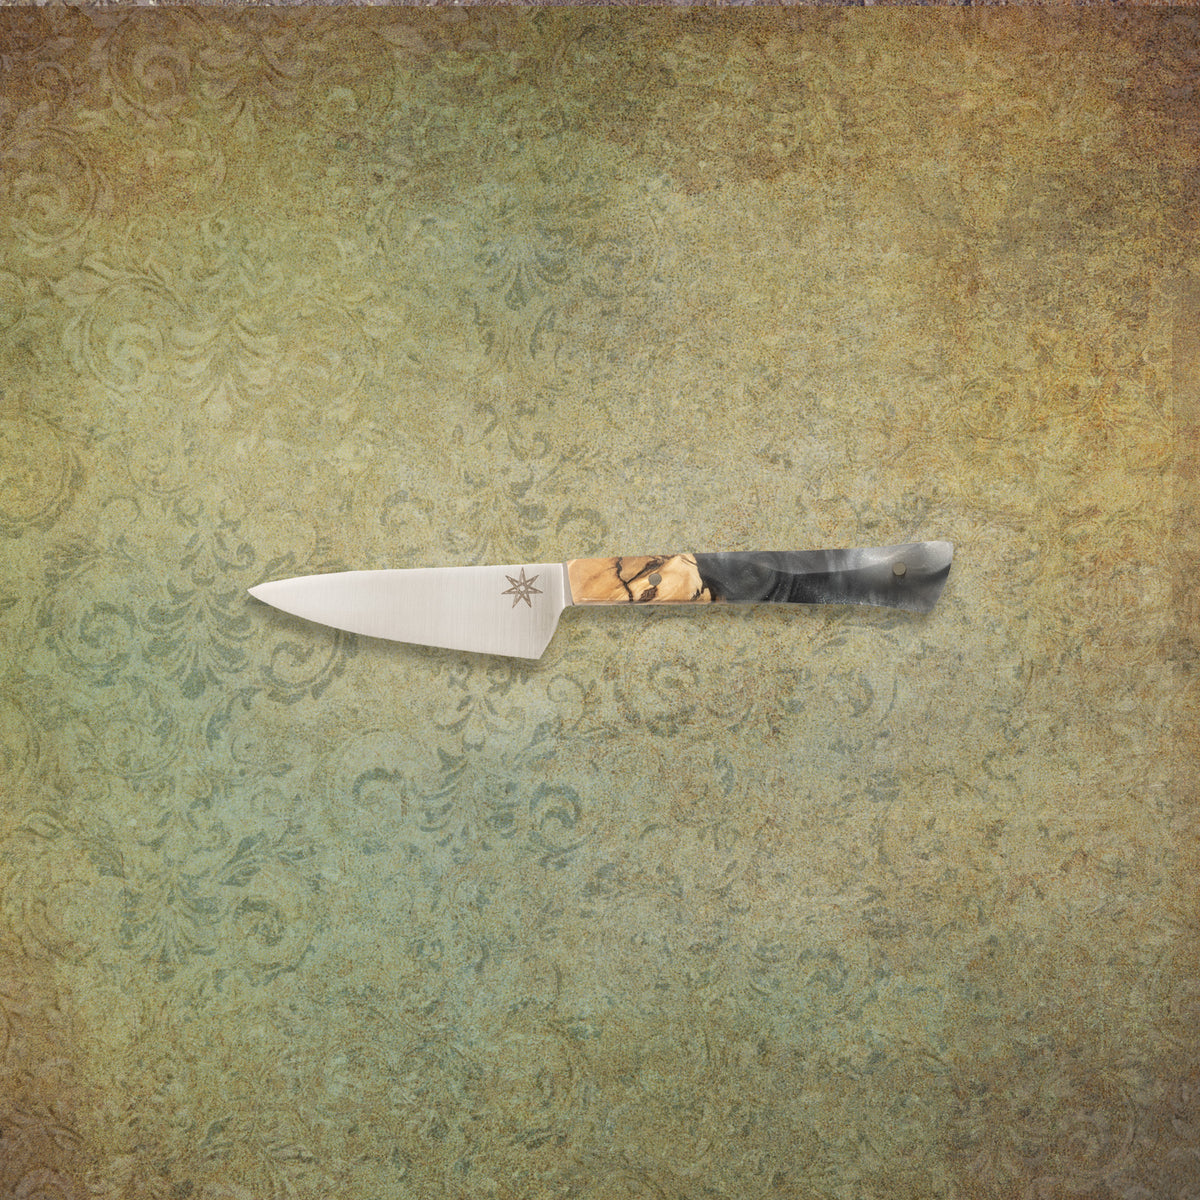 Stainless Steel 3" Paring Knife with Buckeye Burl Wood and Silver Resin Handle handmade by Town Cutler